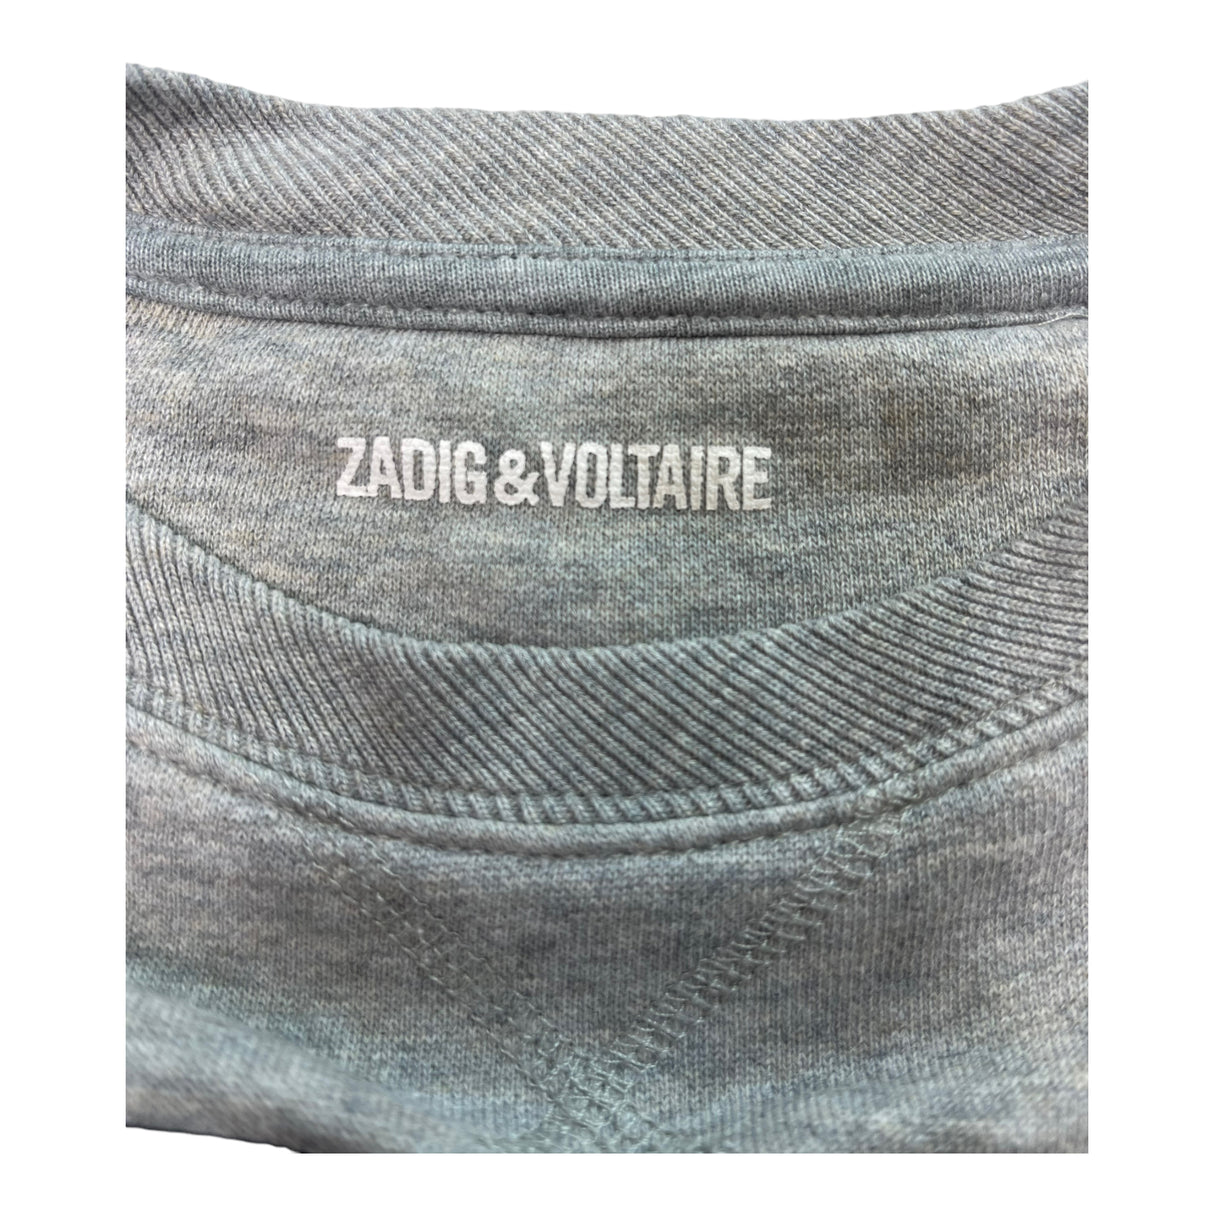 A SEcond chance - Zadig & Voltaire 6Y Kids Shirt - Delivery All Over Lebanon